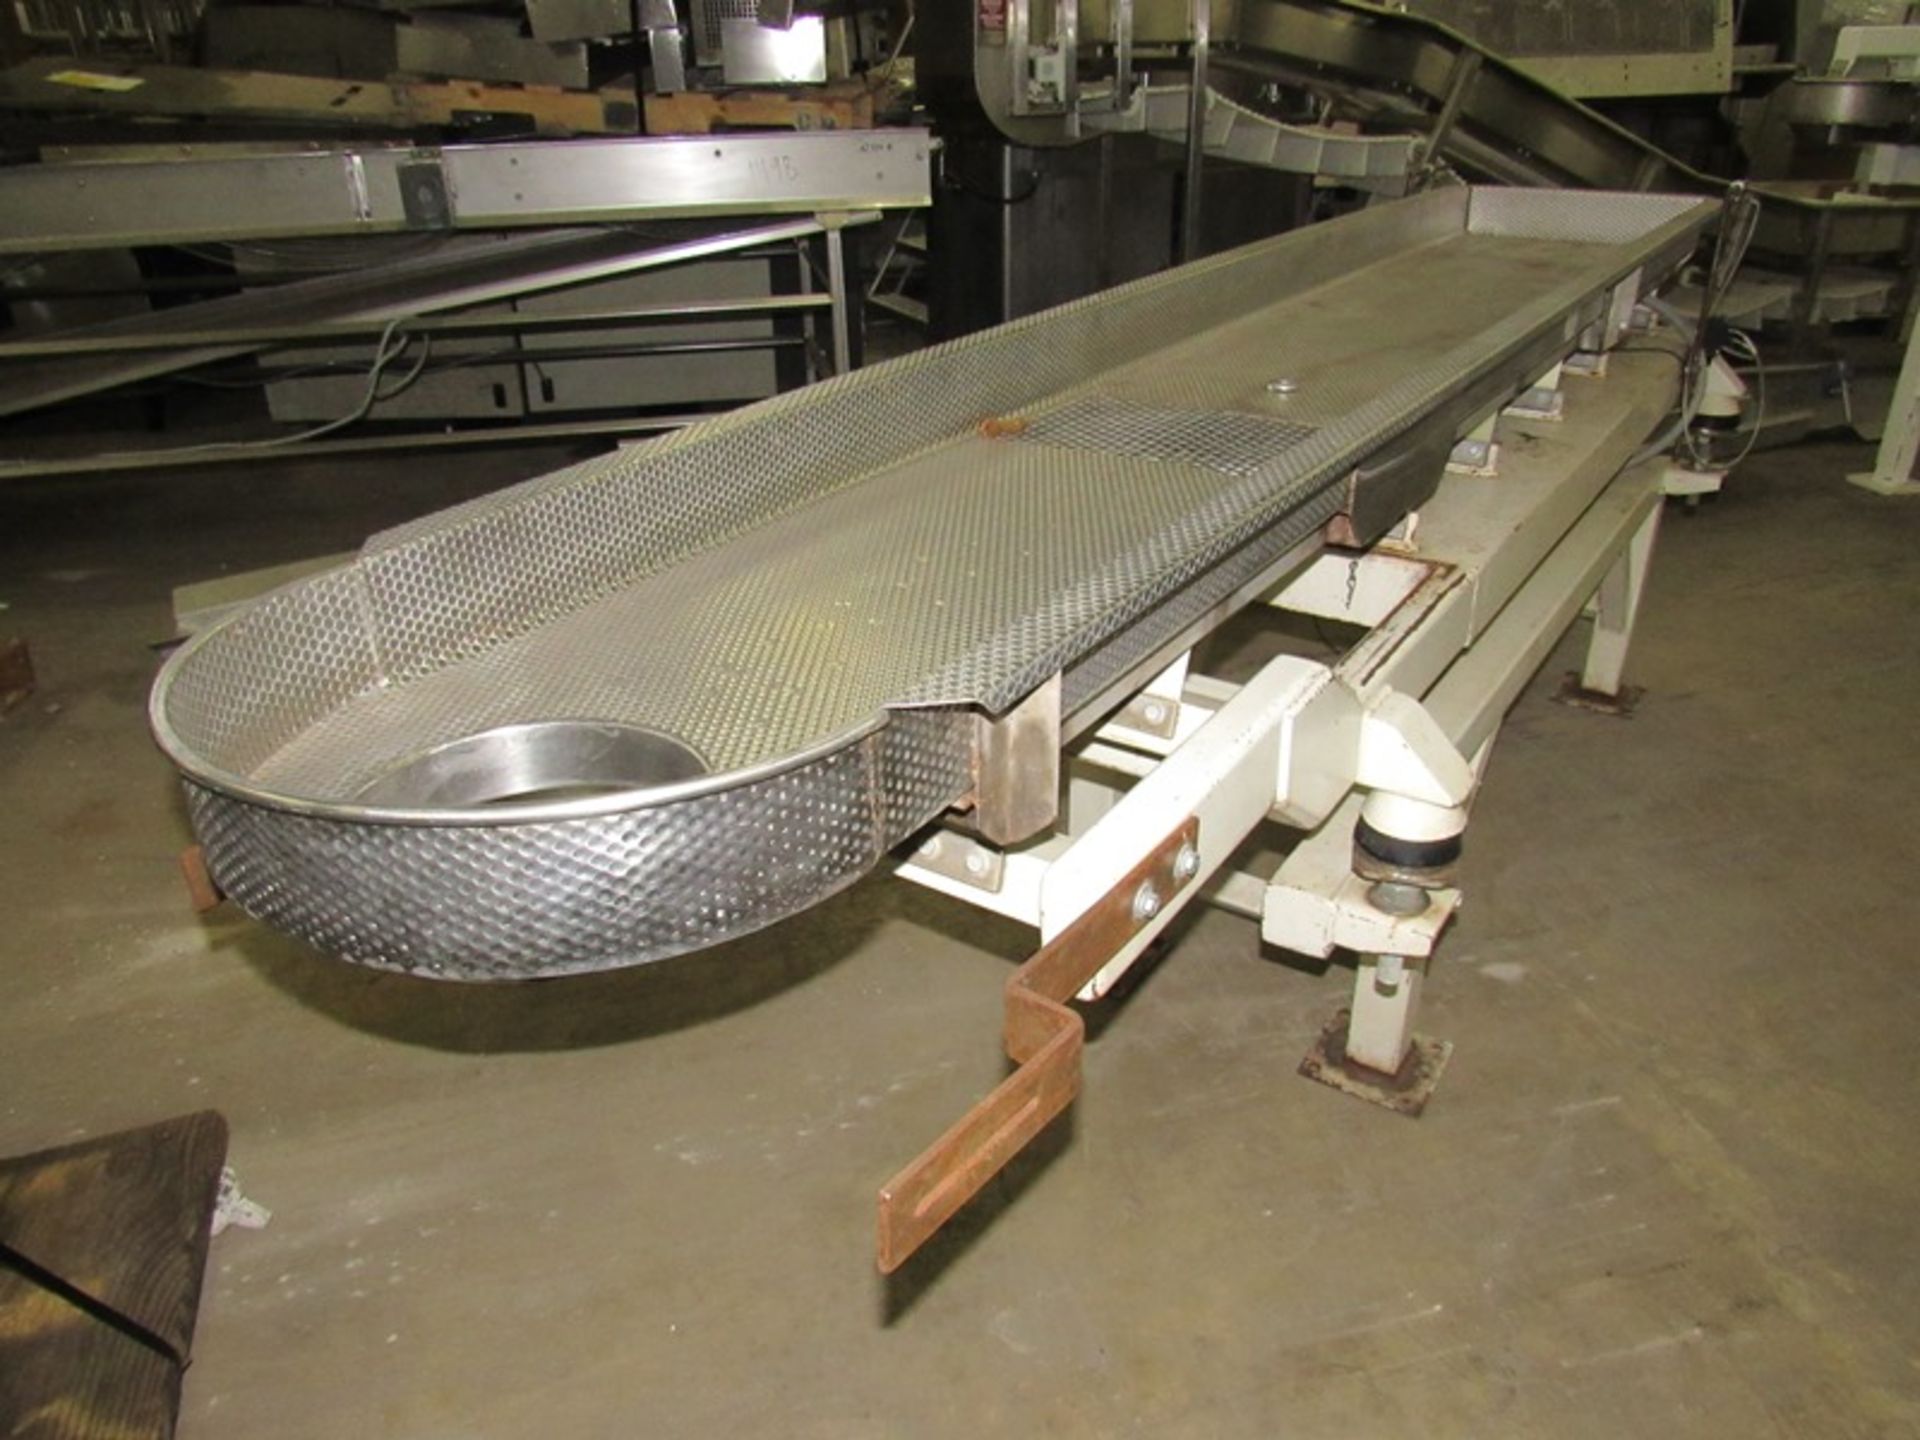 Smalley Mdl. EMC2t Vibratory Conveyor, dimpled stainless steel tray, 18" W X 115" L X 4" D, 9" - Image 2 of 6